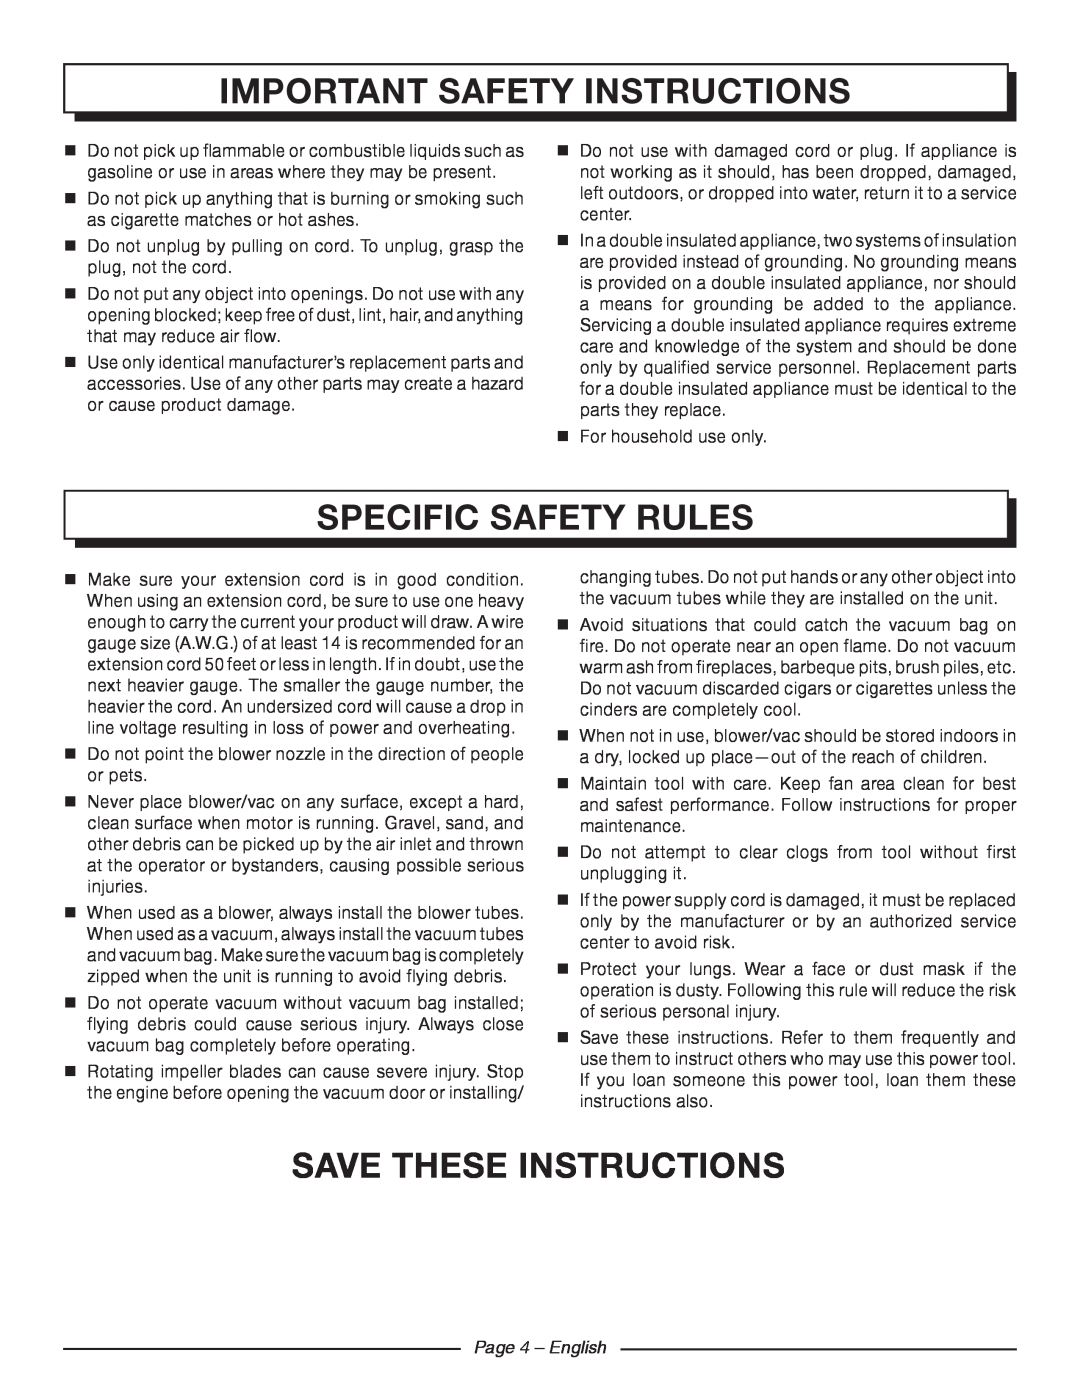 Homelite UT42120 Specific Safety Rules, Save these instructions, Page 4 - English, important safety instructions 